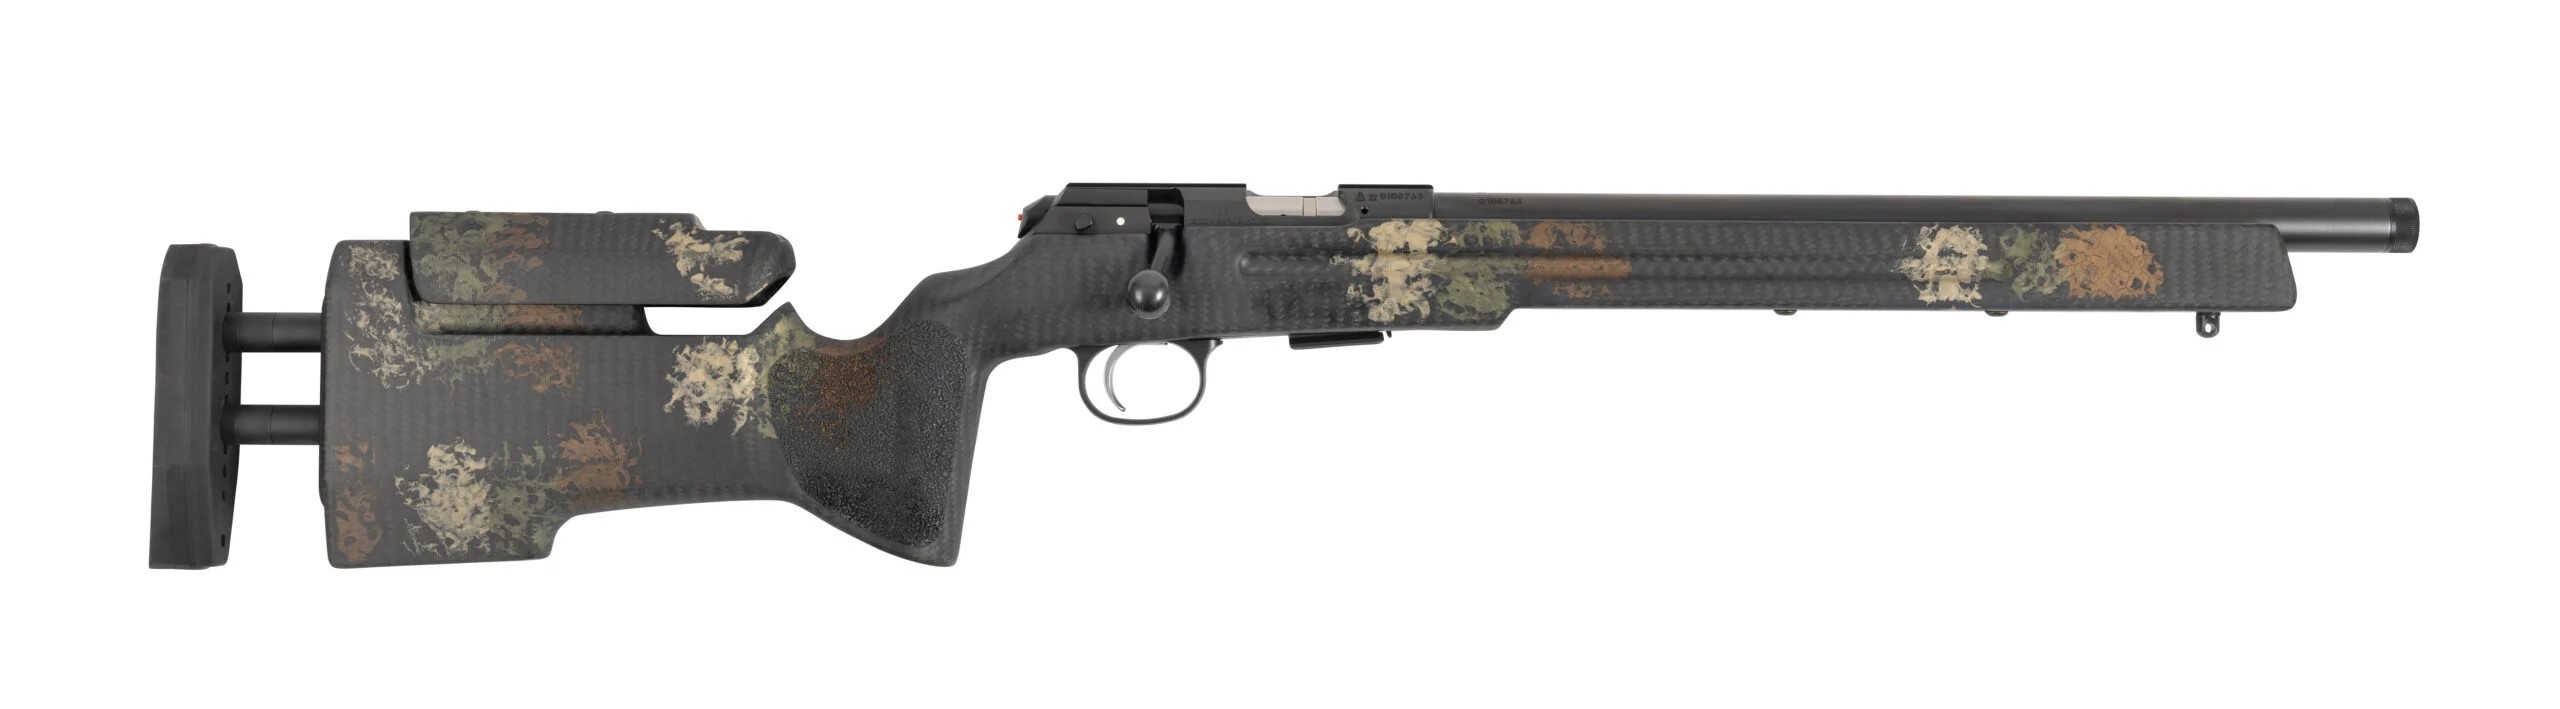 CZ-USA 457 Varmint Precision Trainer 22LR NEW 02326 In Stock!-img-0